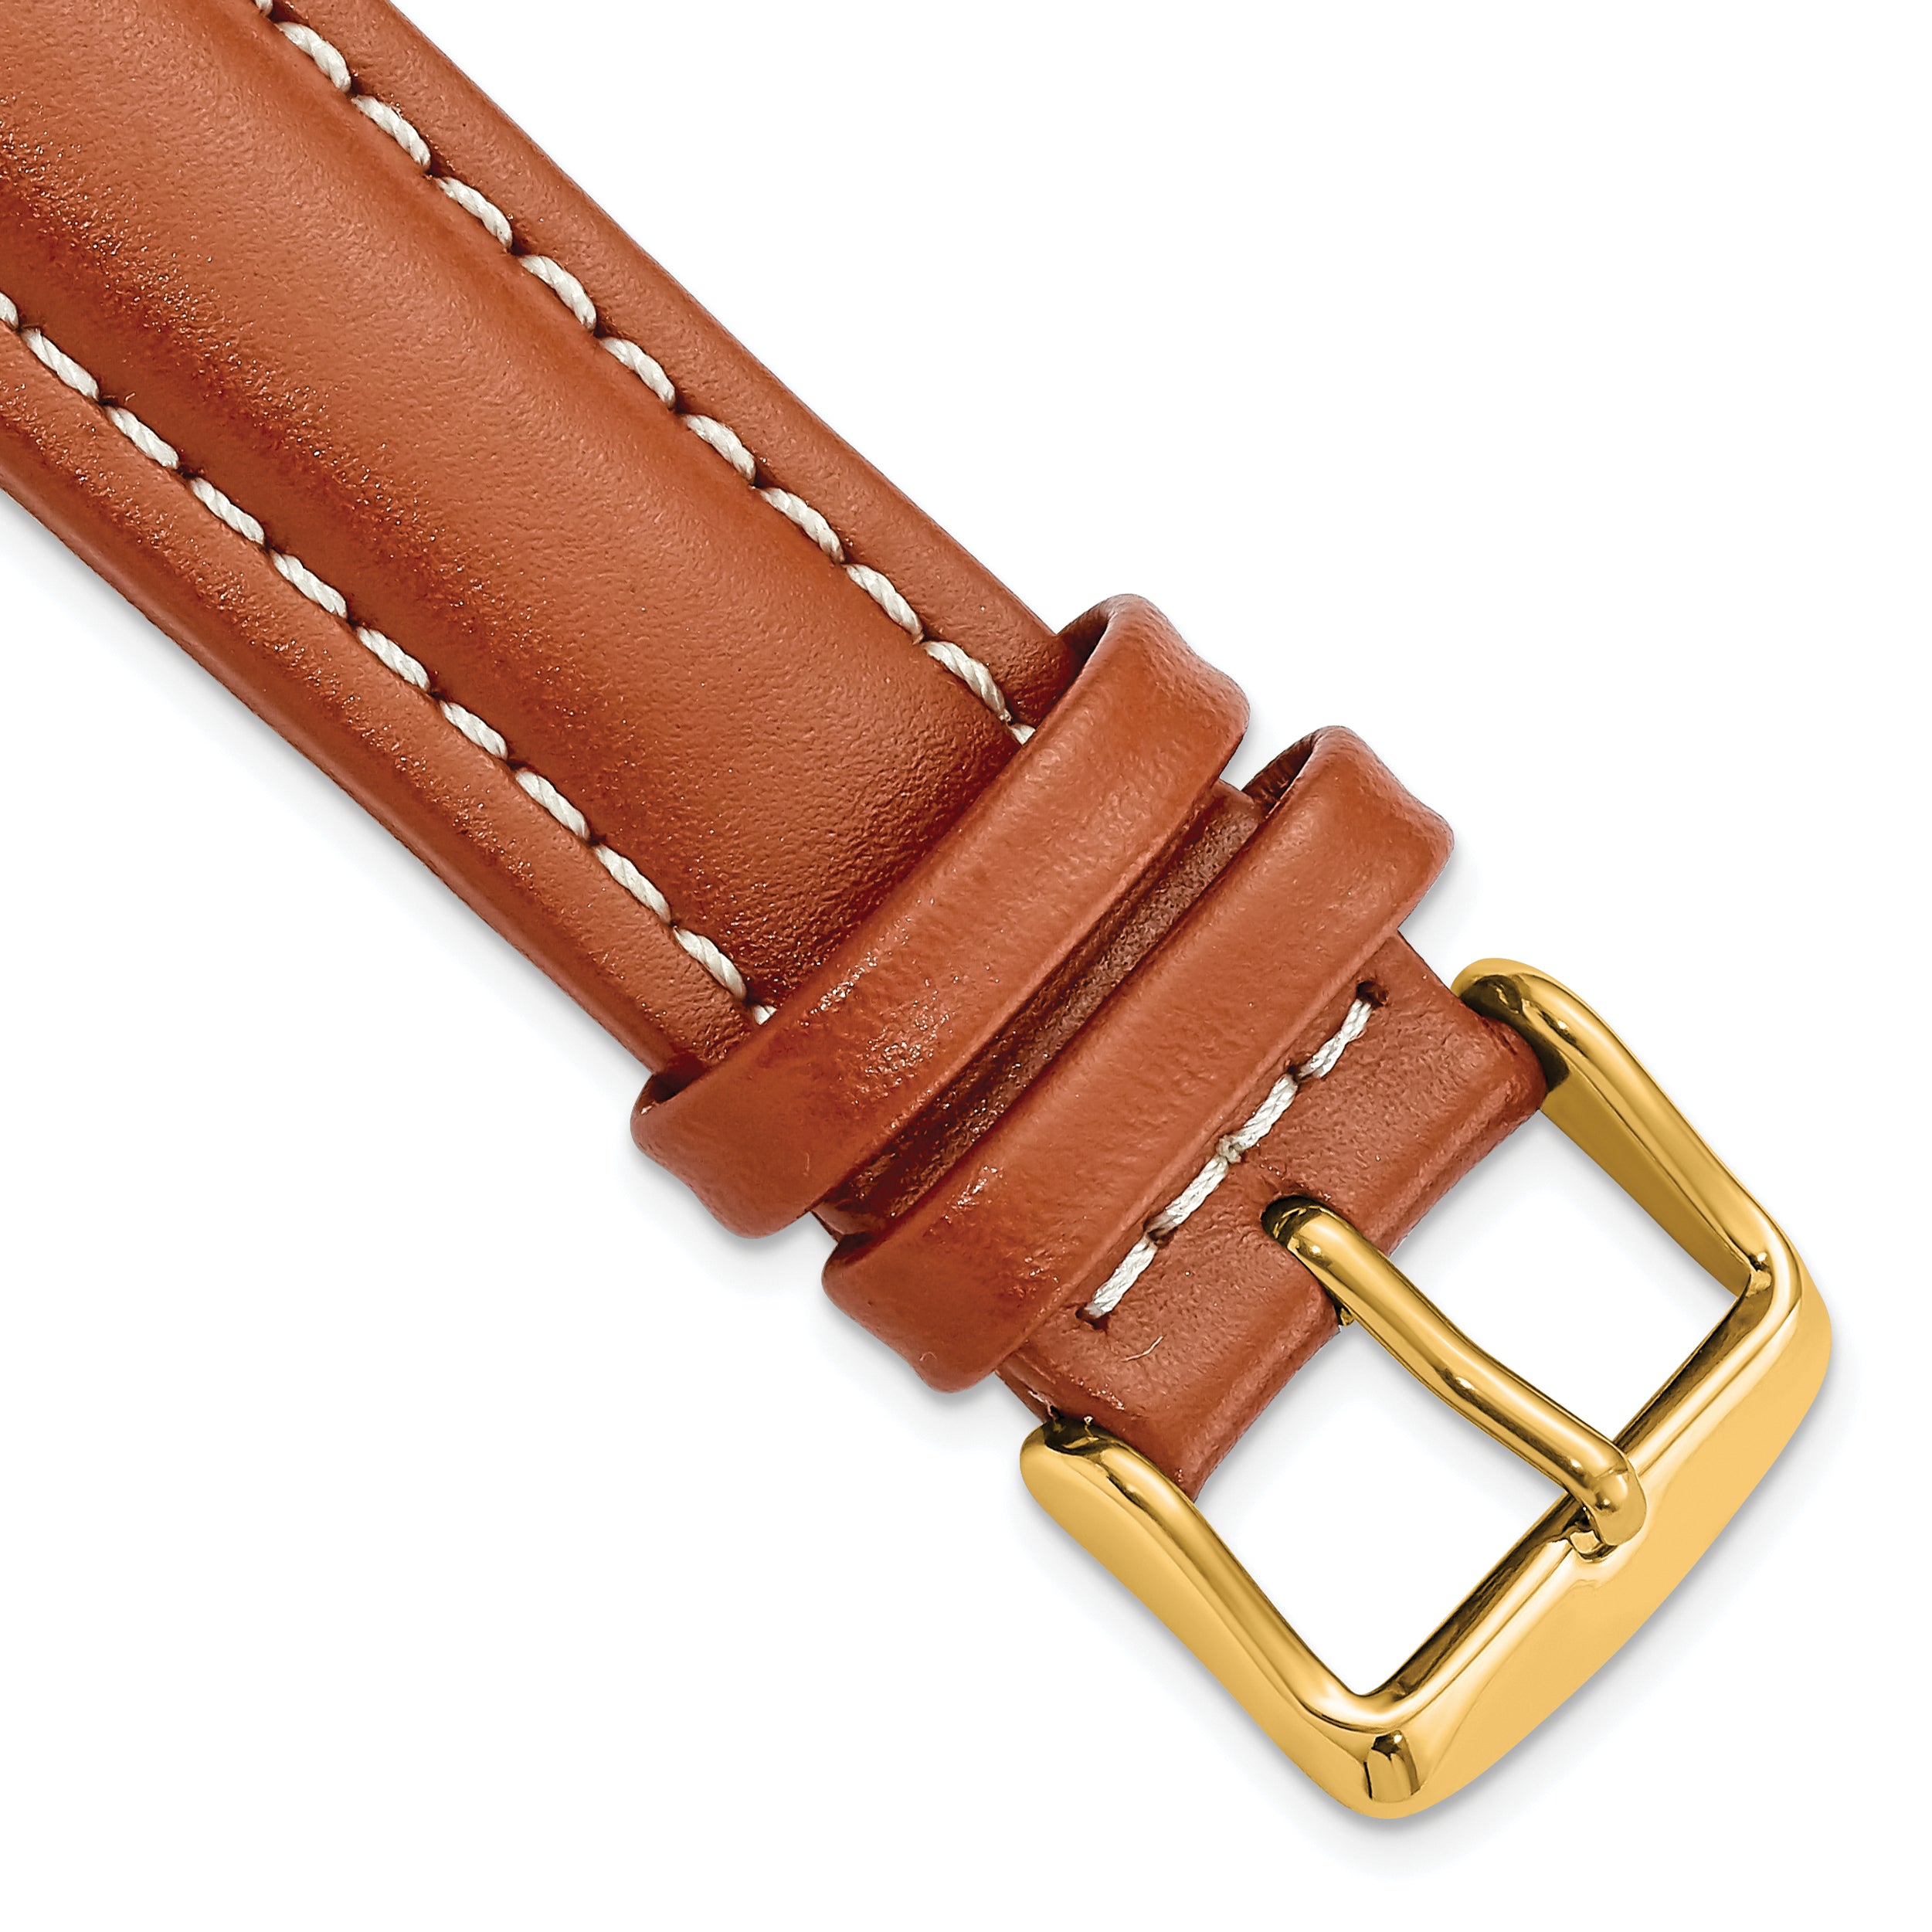 DeBeer 20mm Saddle Brown Oil-tanned Leather with White Stitching and Gold-tone Buckle 7.5 inch Watch Band